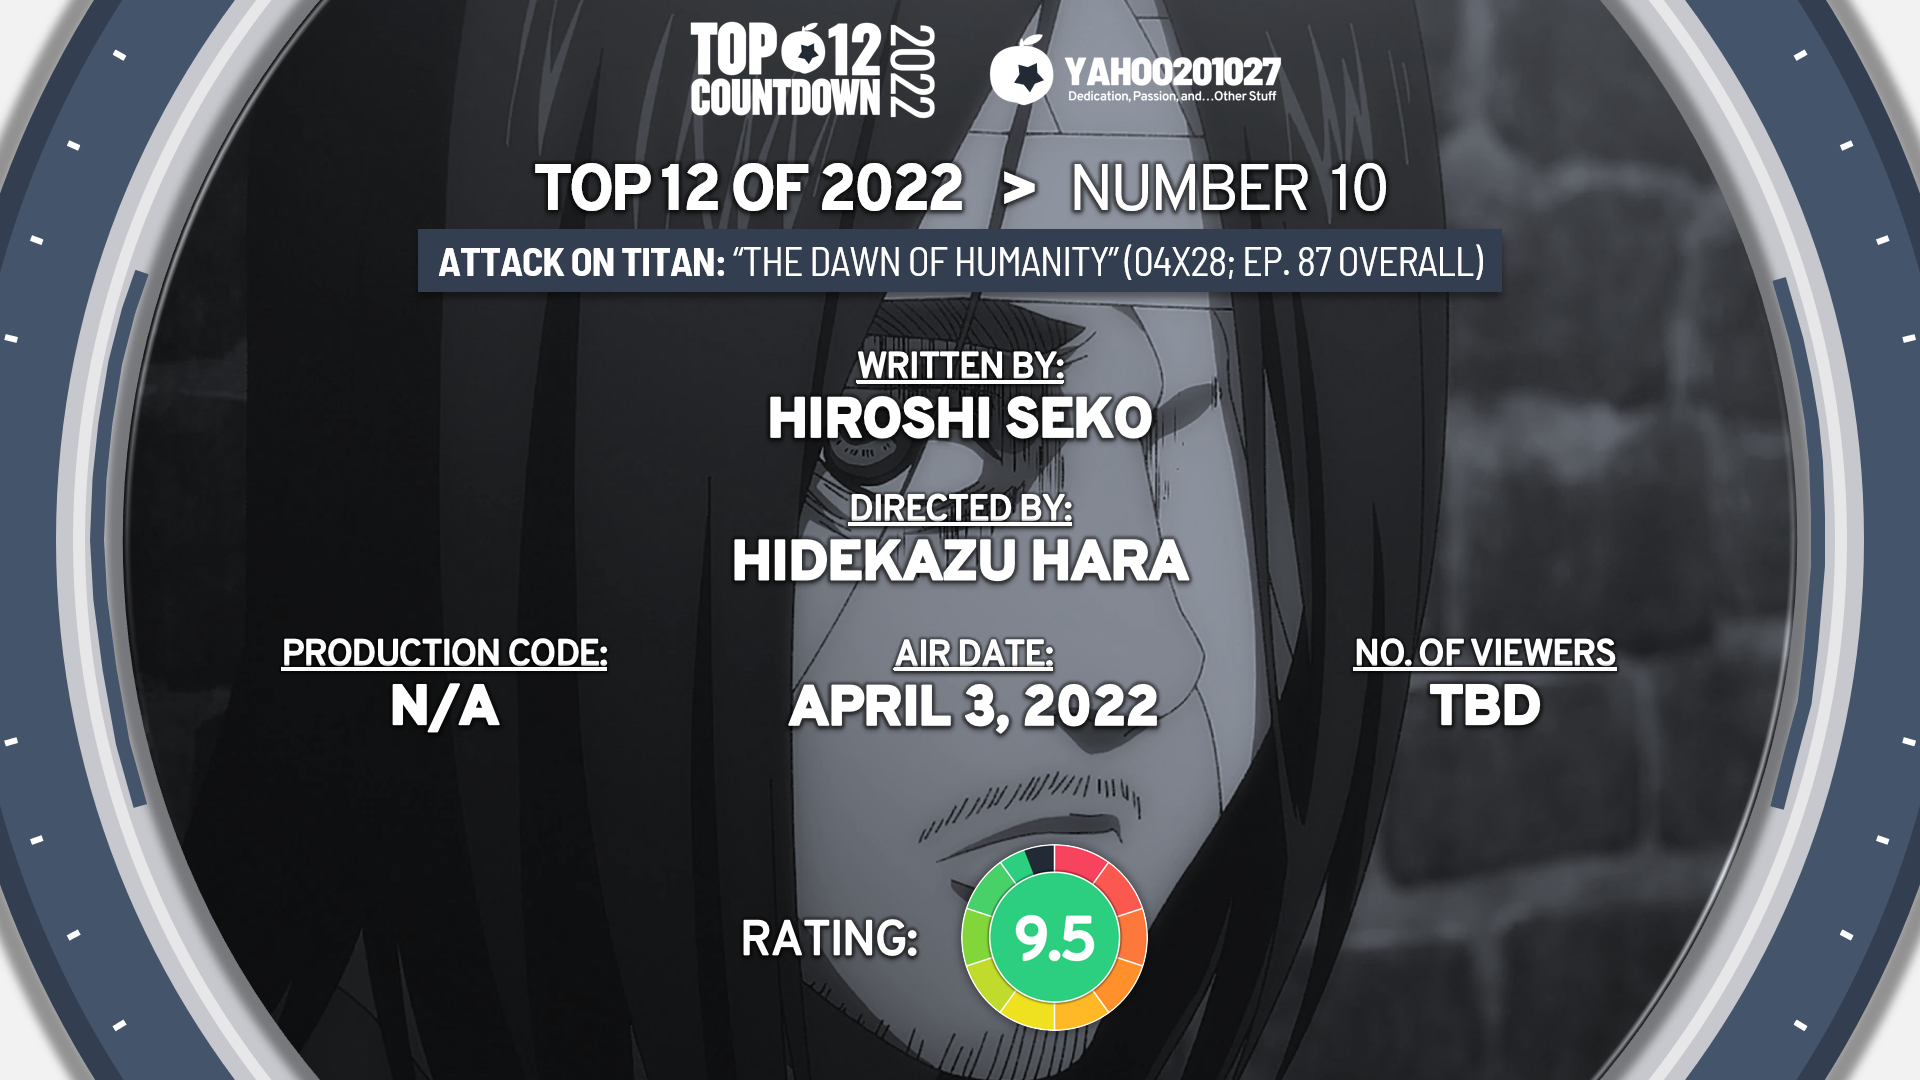 Number 3 of the Top 12 Countdown of 2022 – Attack on Titan 進撃の